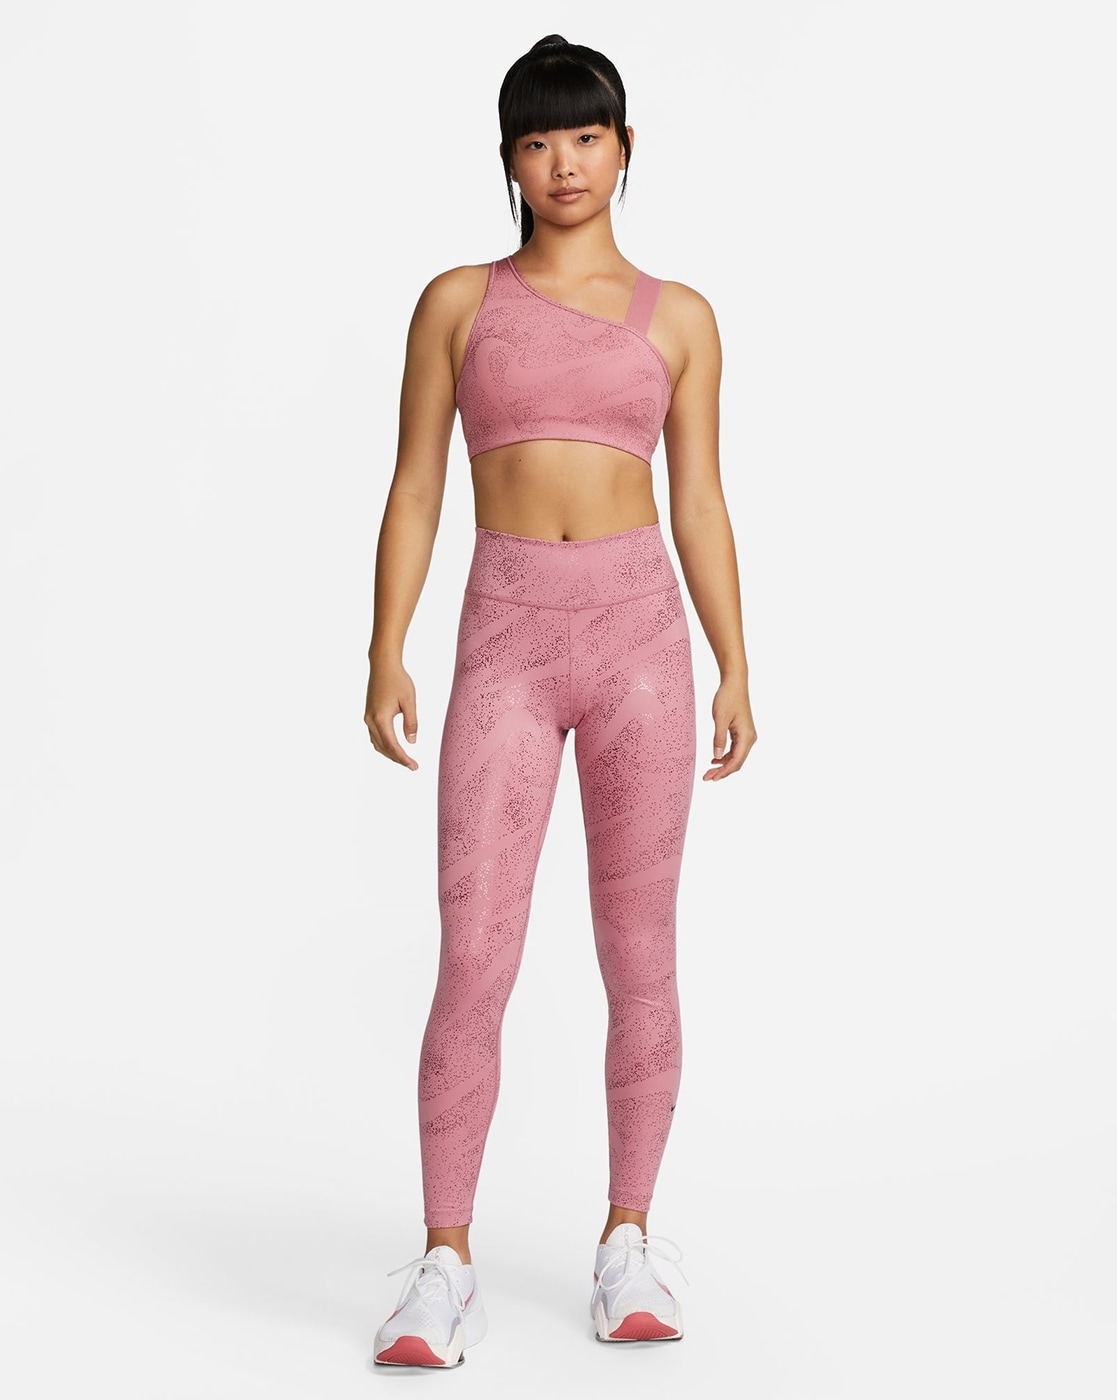 Nike Pro Girl Sports Bra and Leggings Matching Set  Girls sports bras,  Sports bra and leggings, Light wash ripped jeans